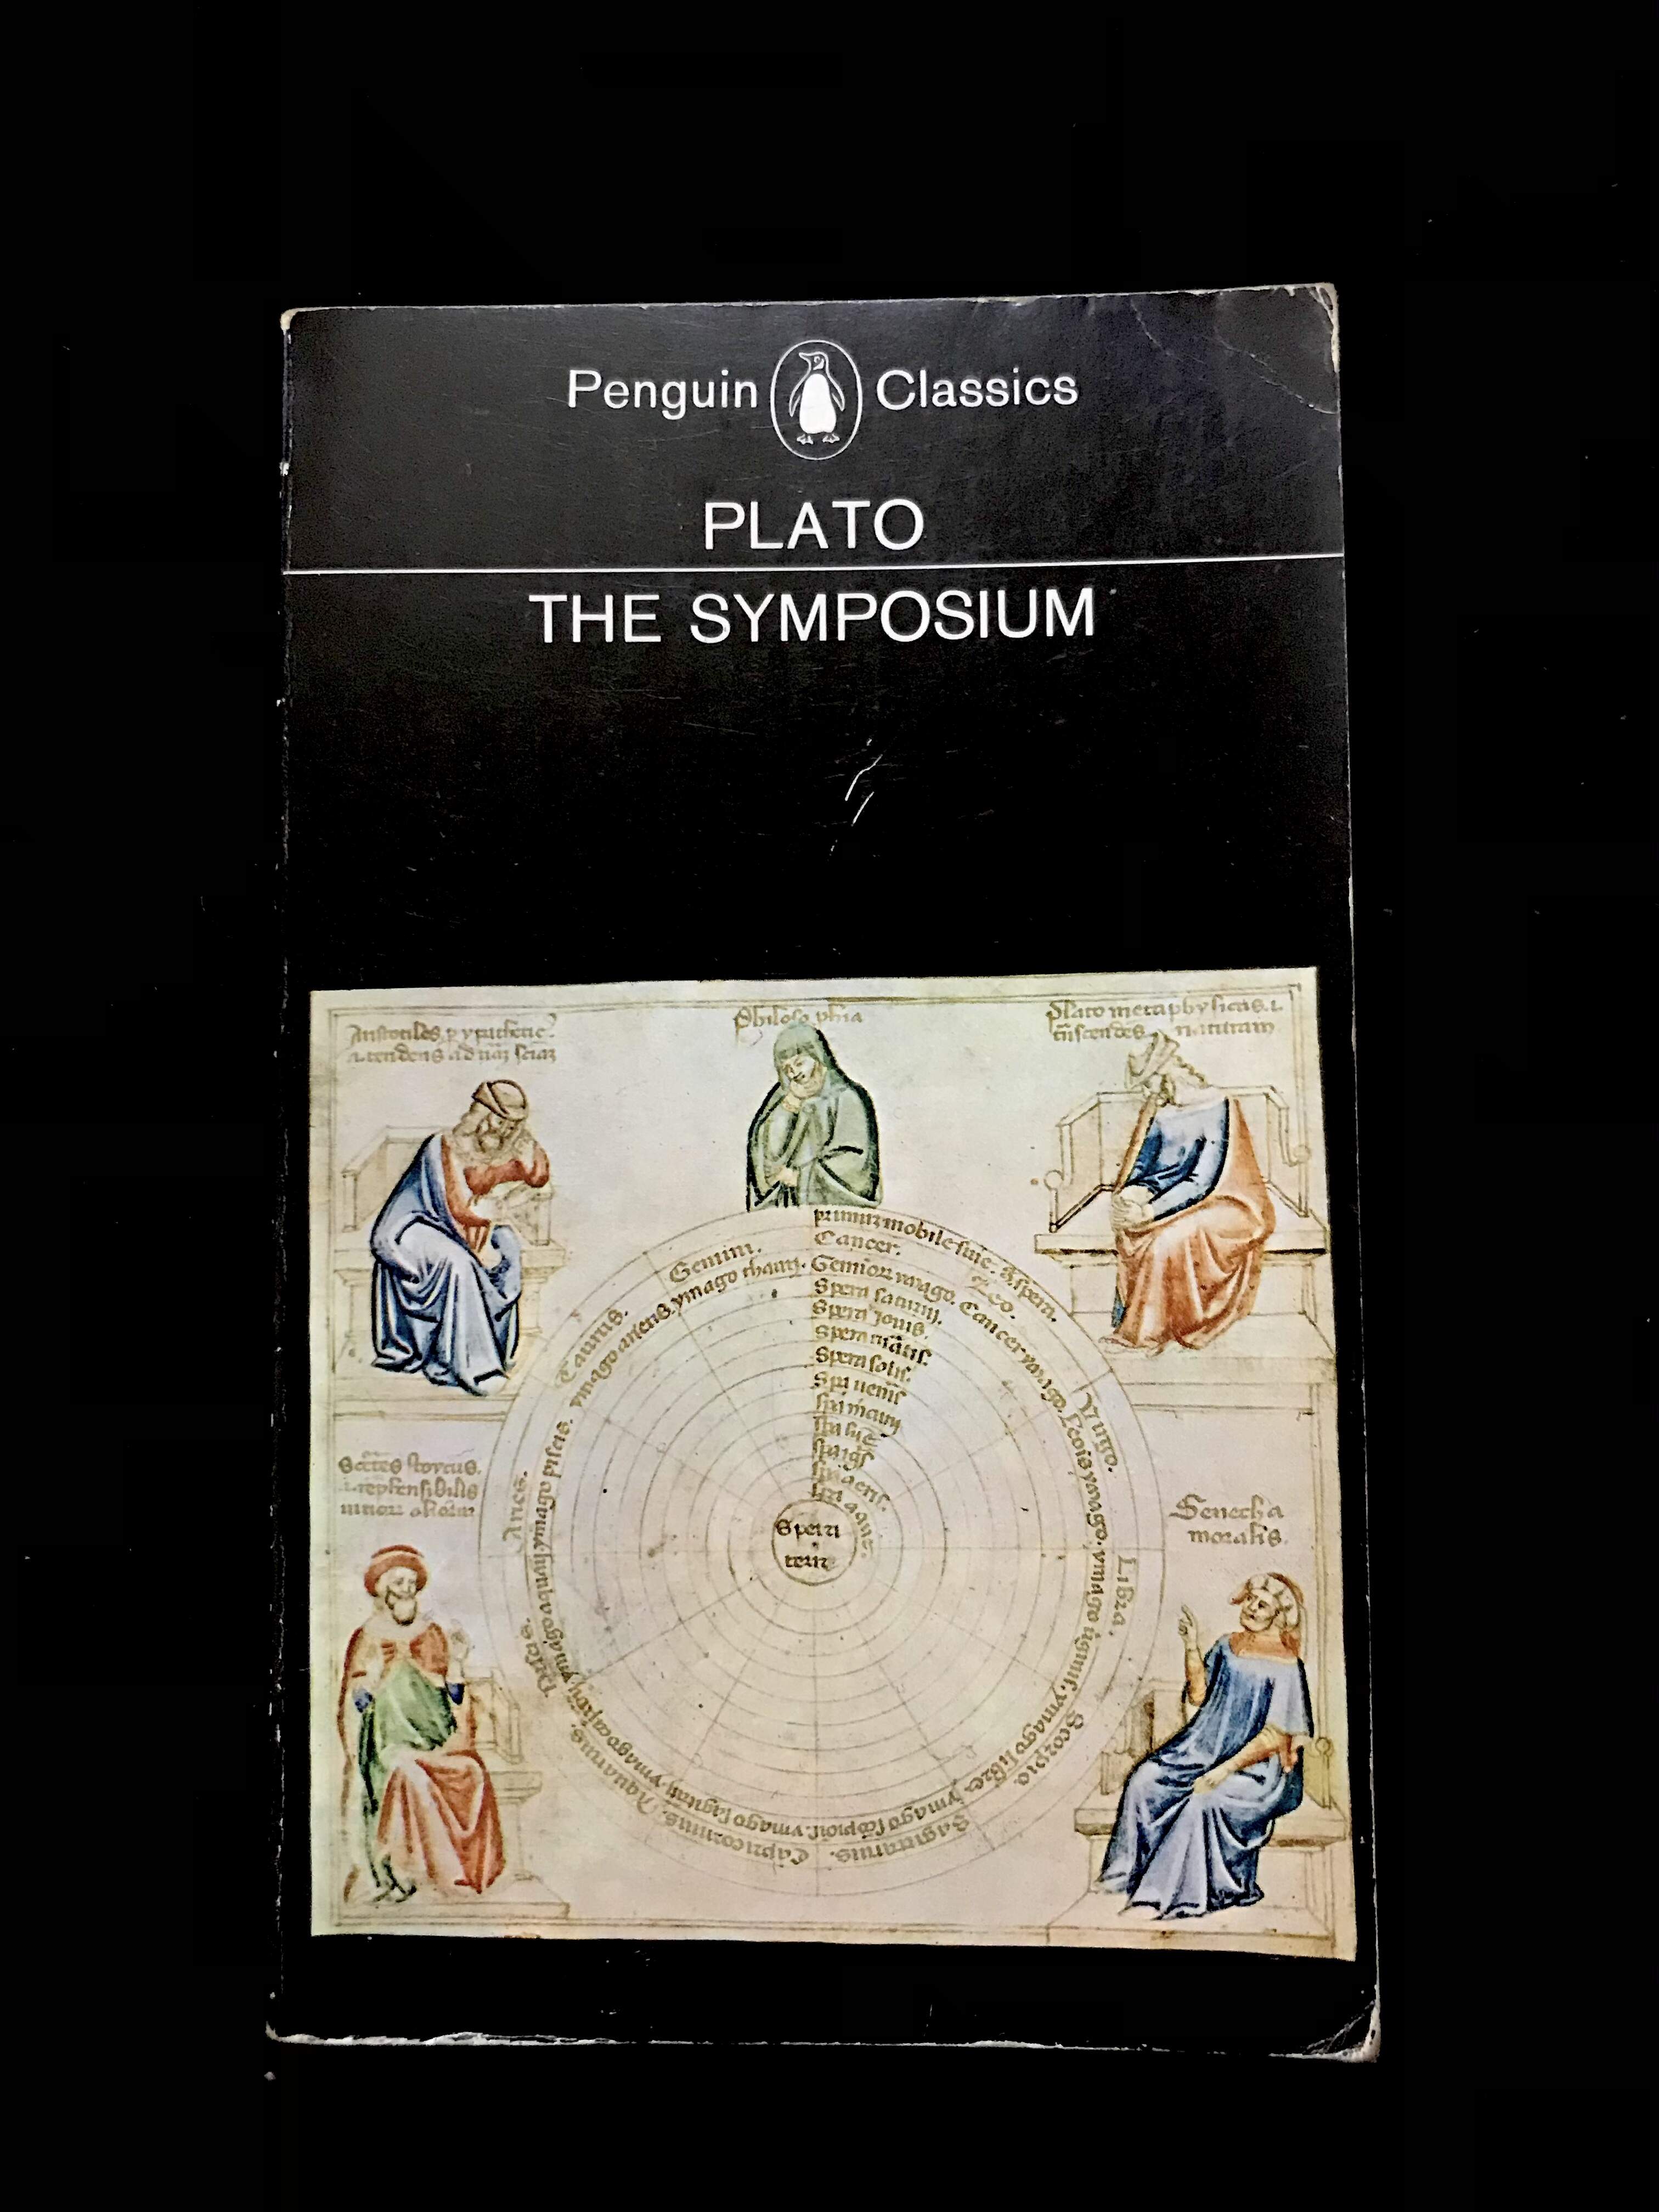 The Symposuim by Plato